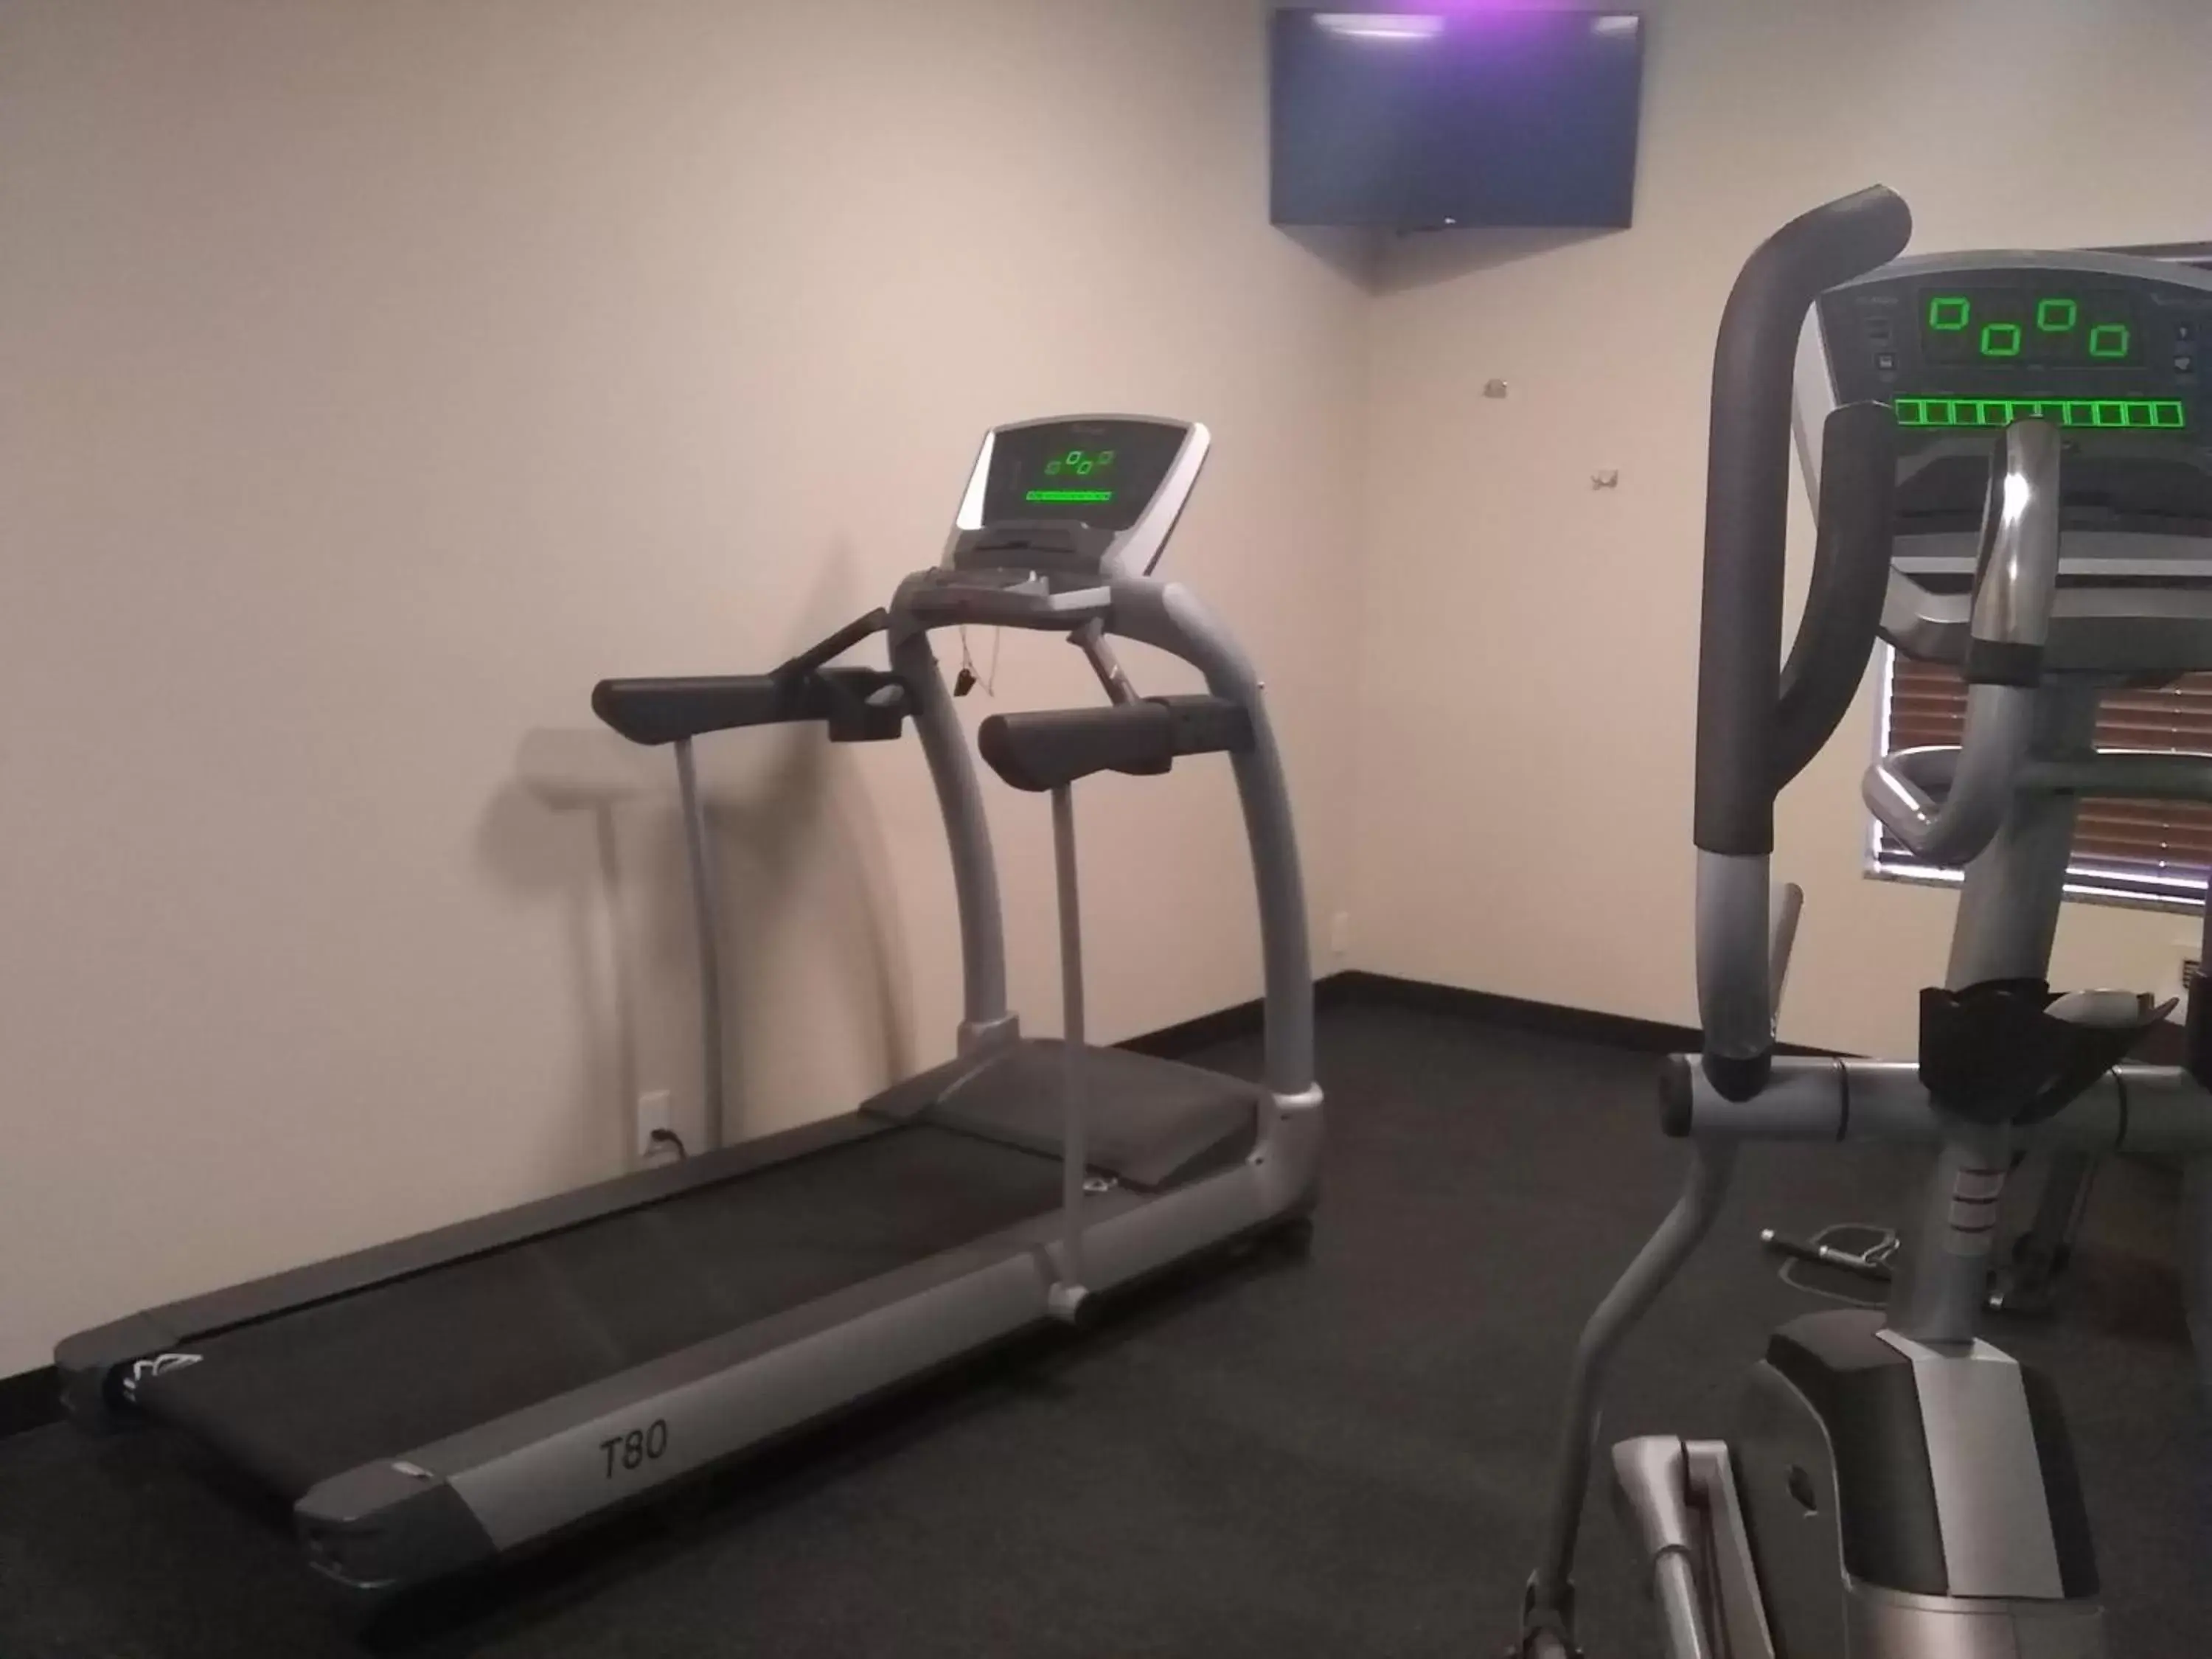 Fitness centre/facilities, Fitness Center/Facilities in Best Western PLUS Walla Walla Suites Inn